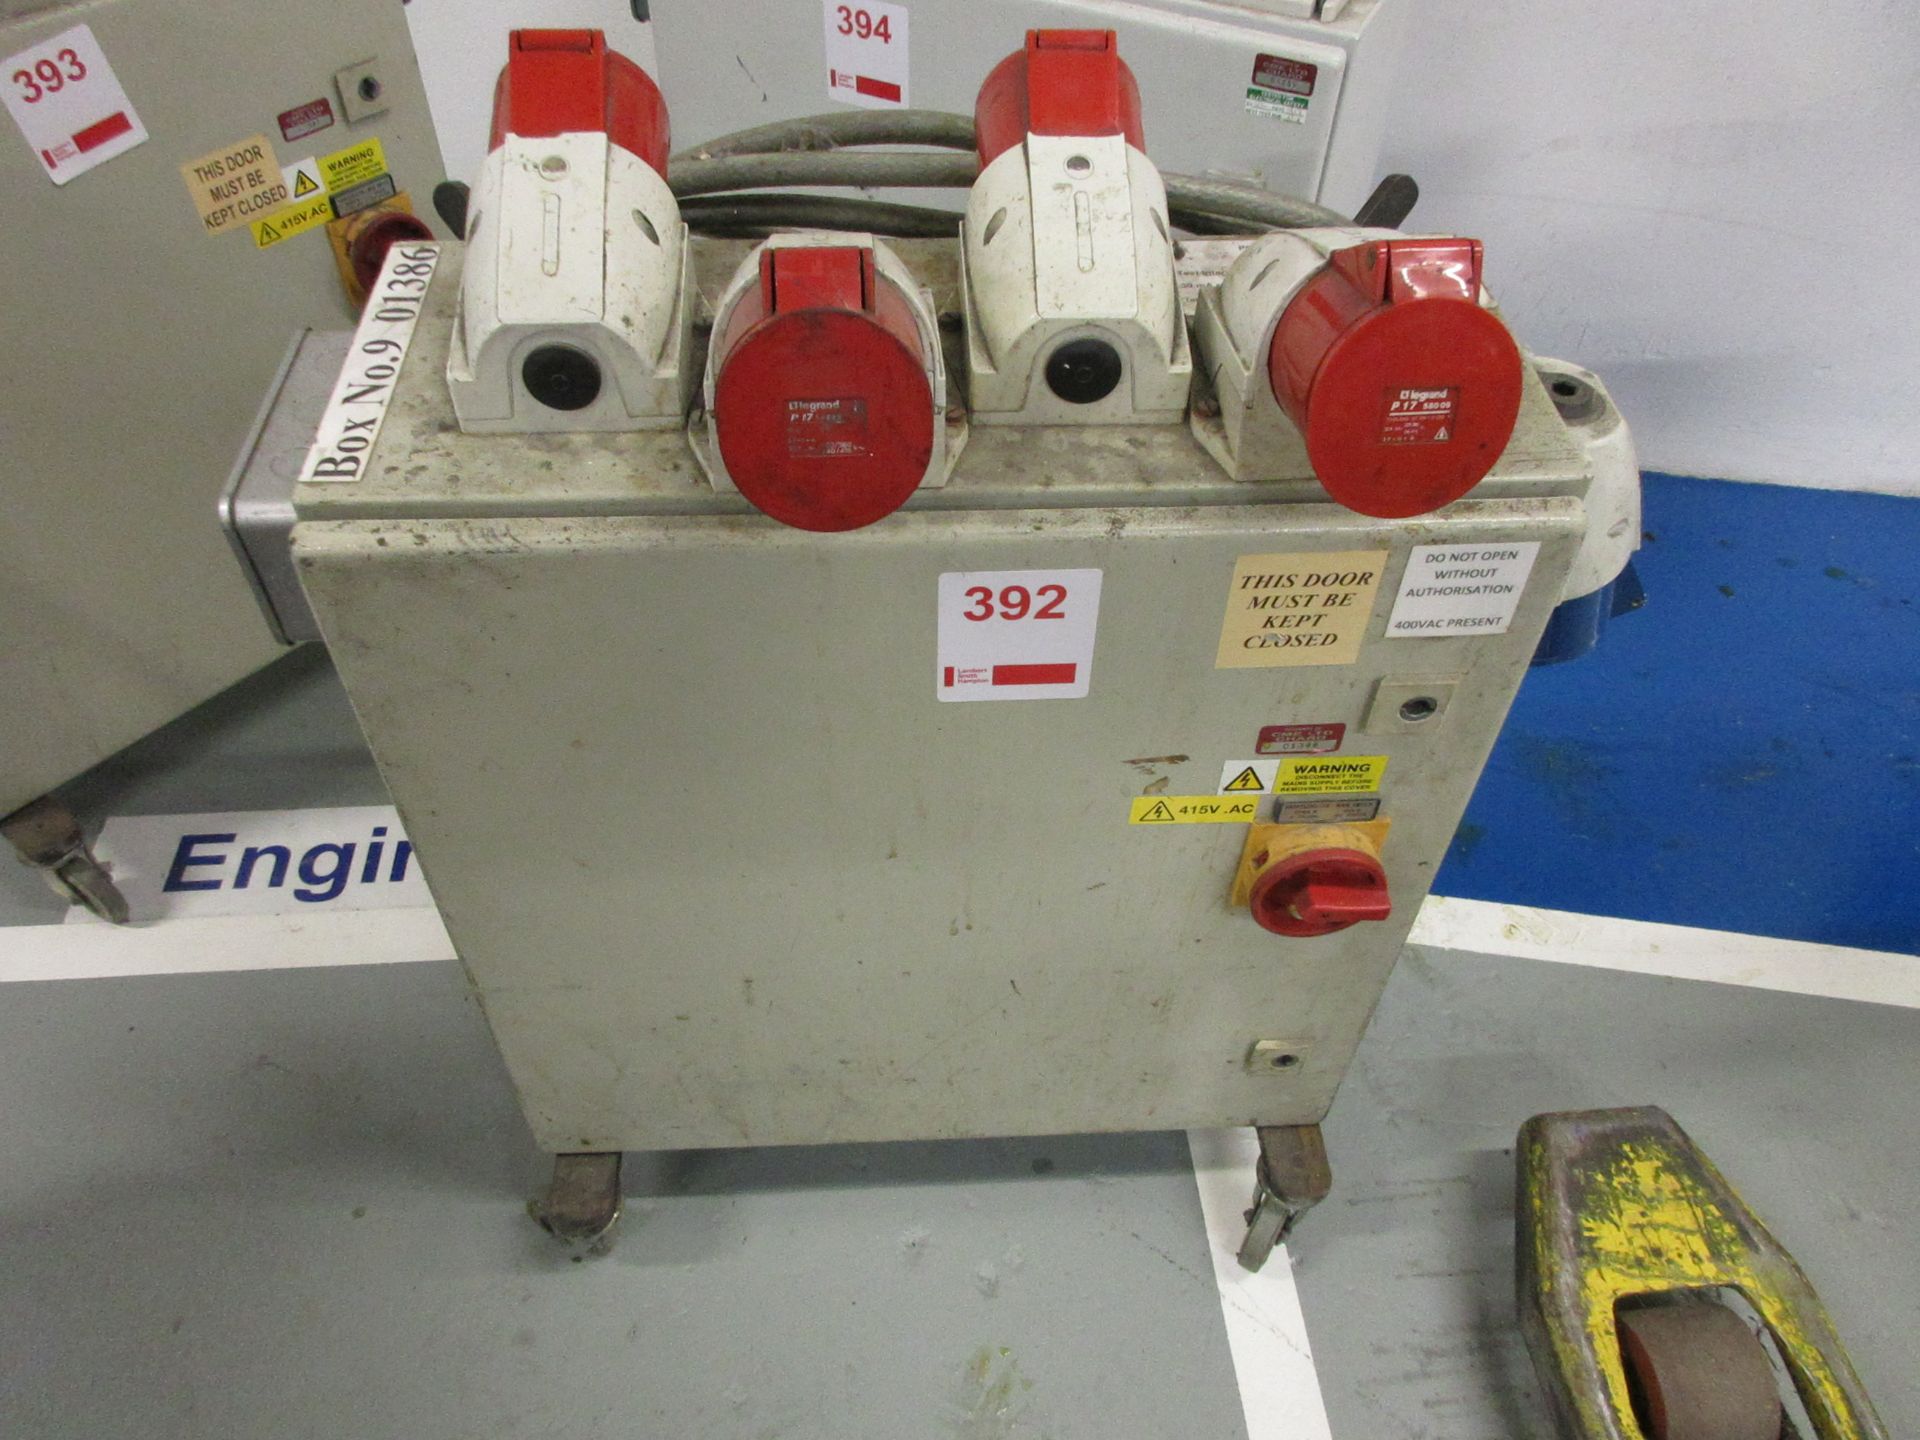 Mobile power supply unit (ref. box no. 13), 30 MA rcd fitted, serial no. 01386